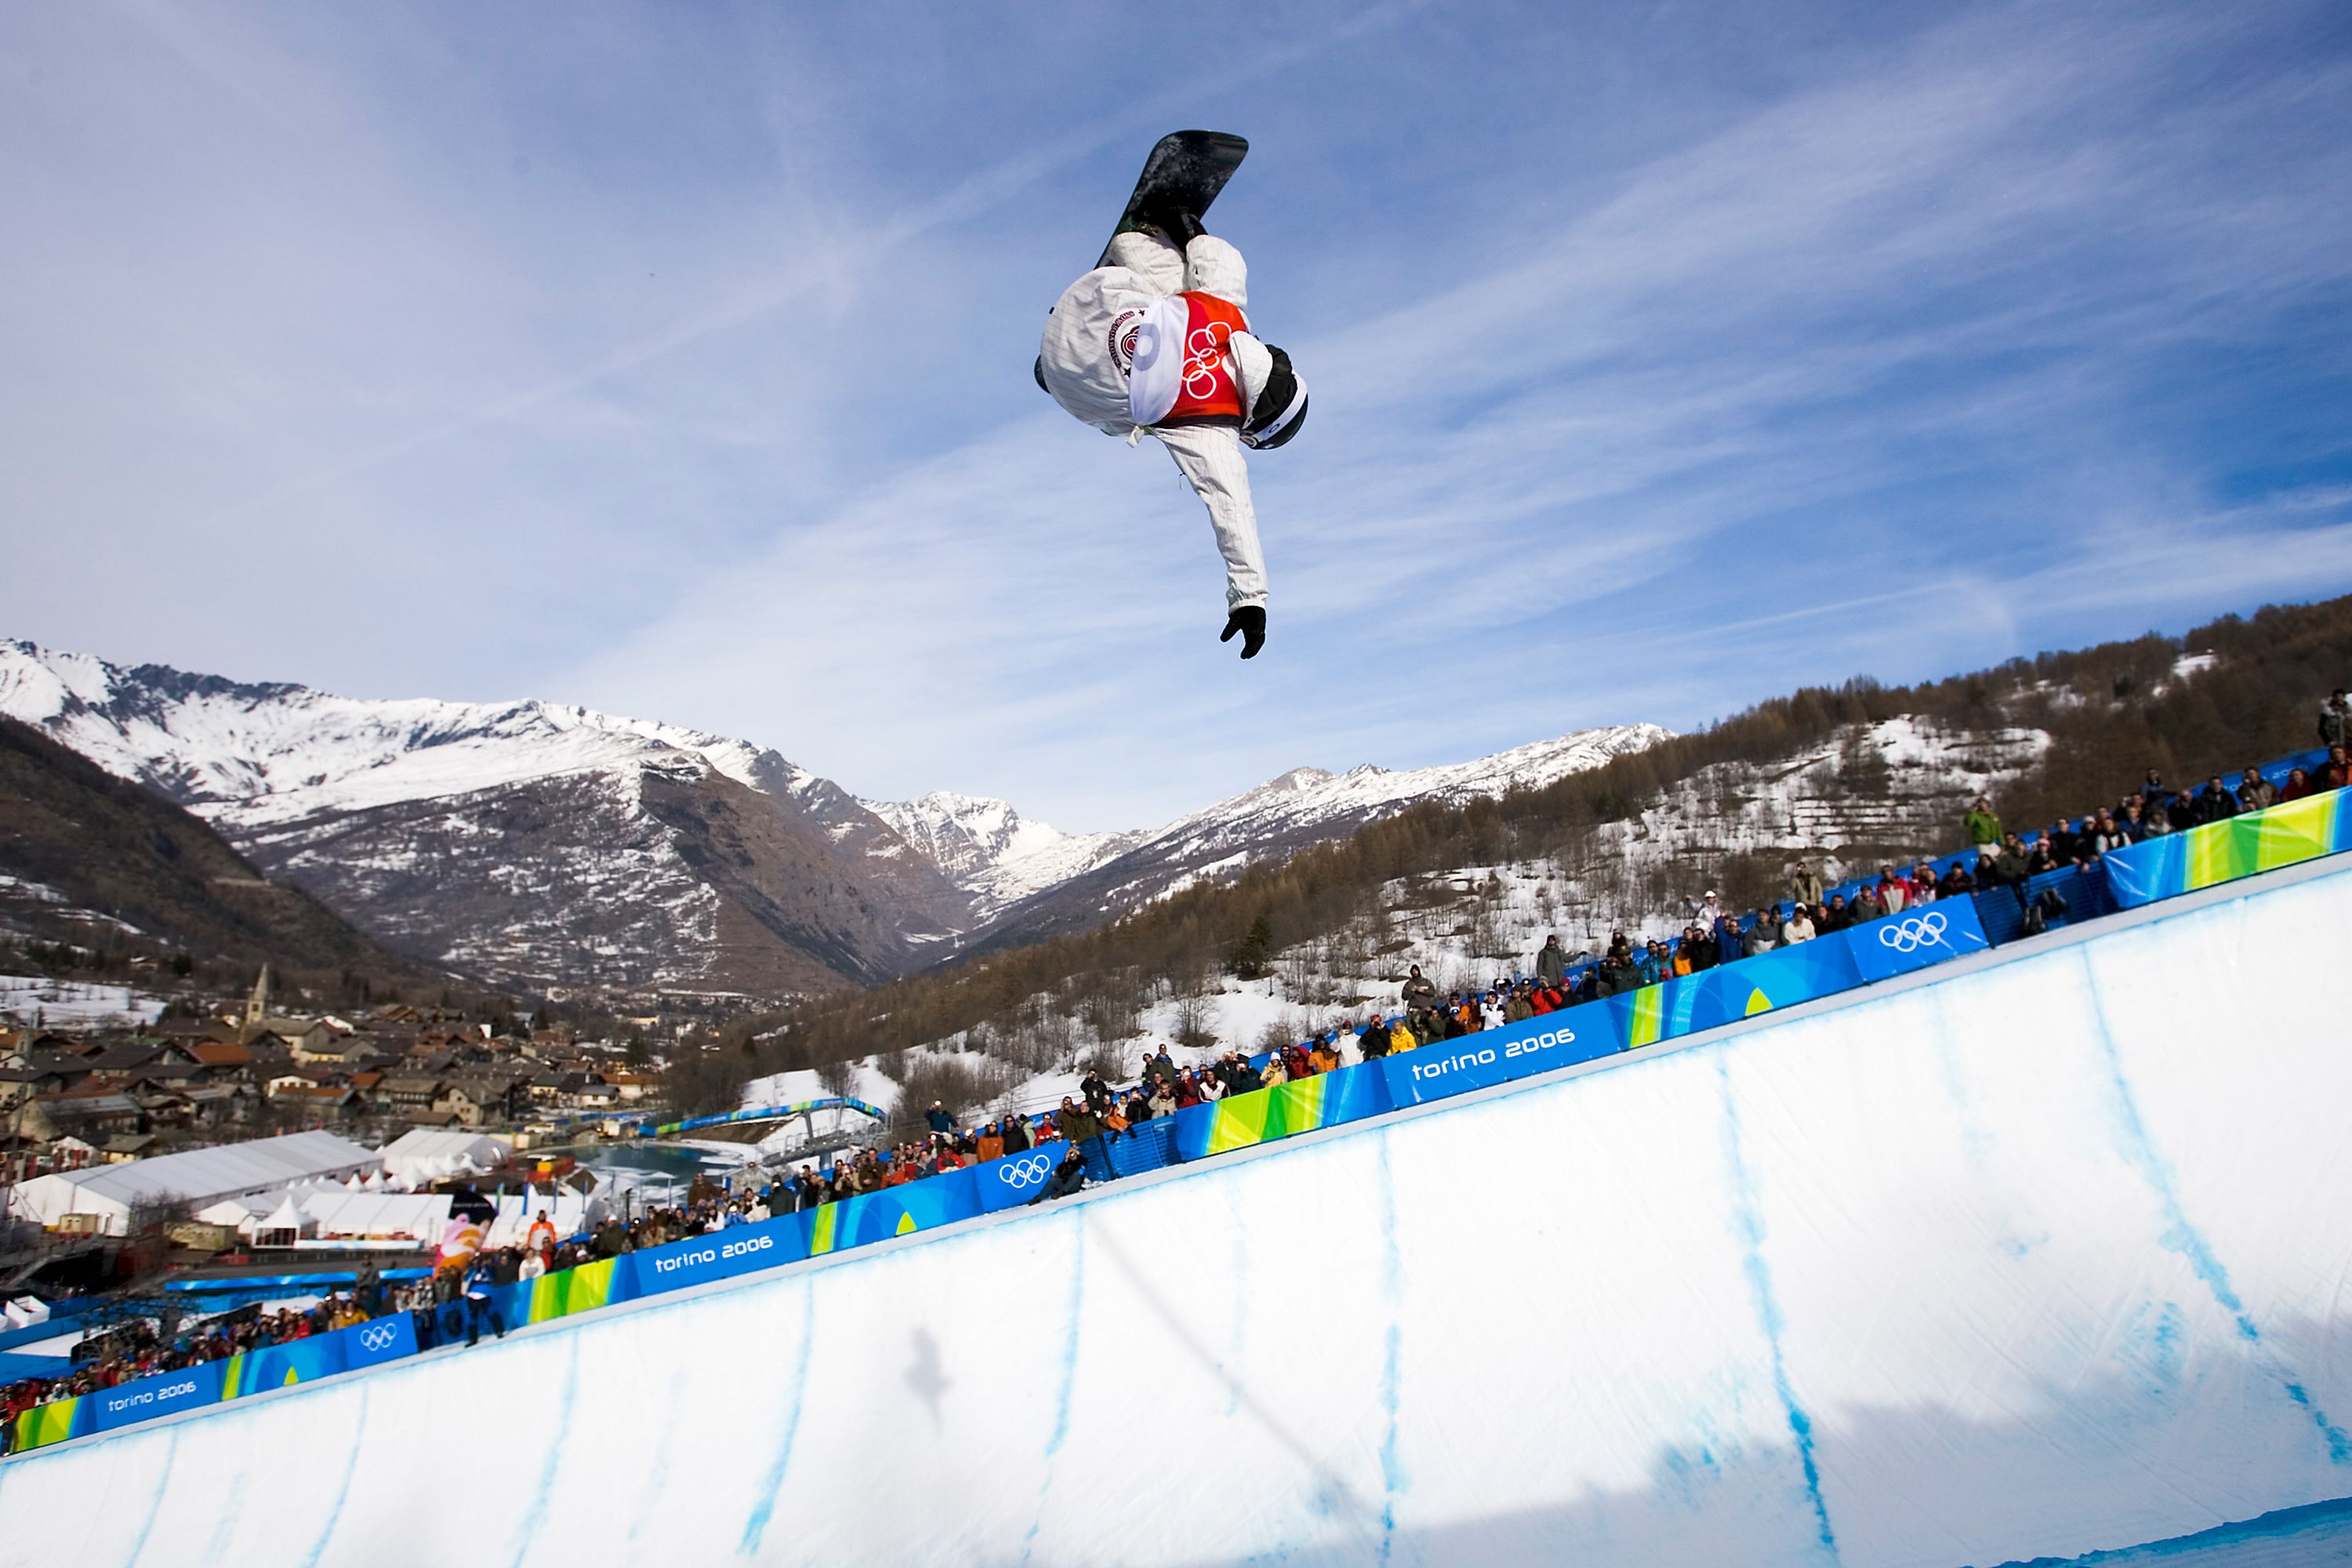 Shaun White Announces Retirement from Pro Snowboarding Ahead of